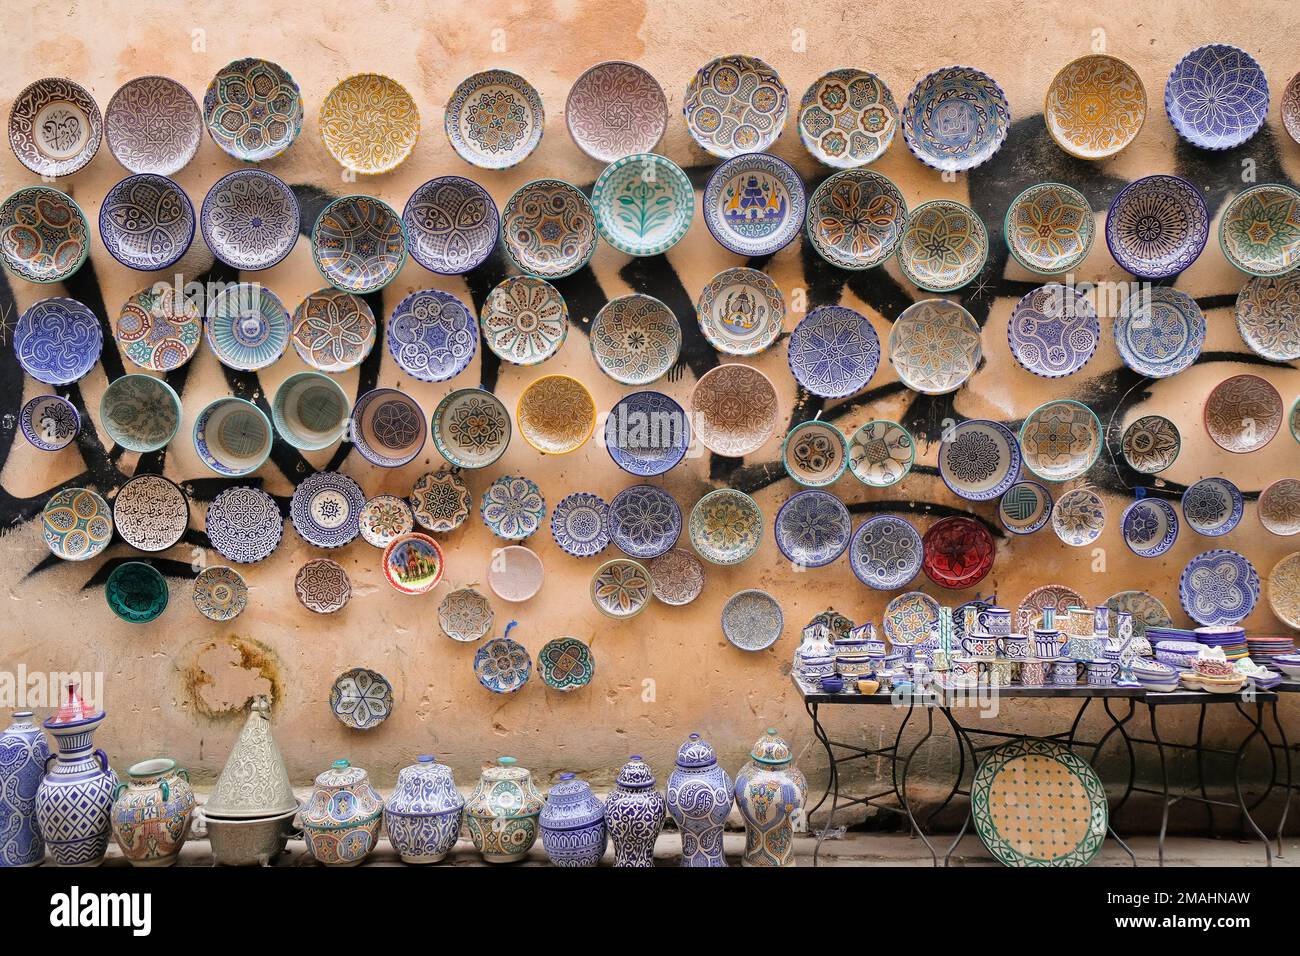 Fez, Morocco - ceramic goods for sale in Fes el Bali market. Cups and saucers on table, jars on floor, plates on vandalized wall. Travel background. Stock Photo